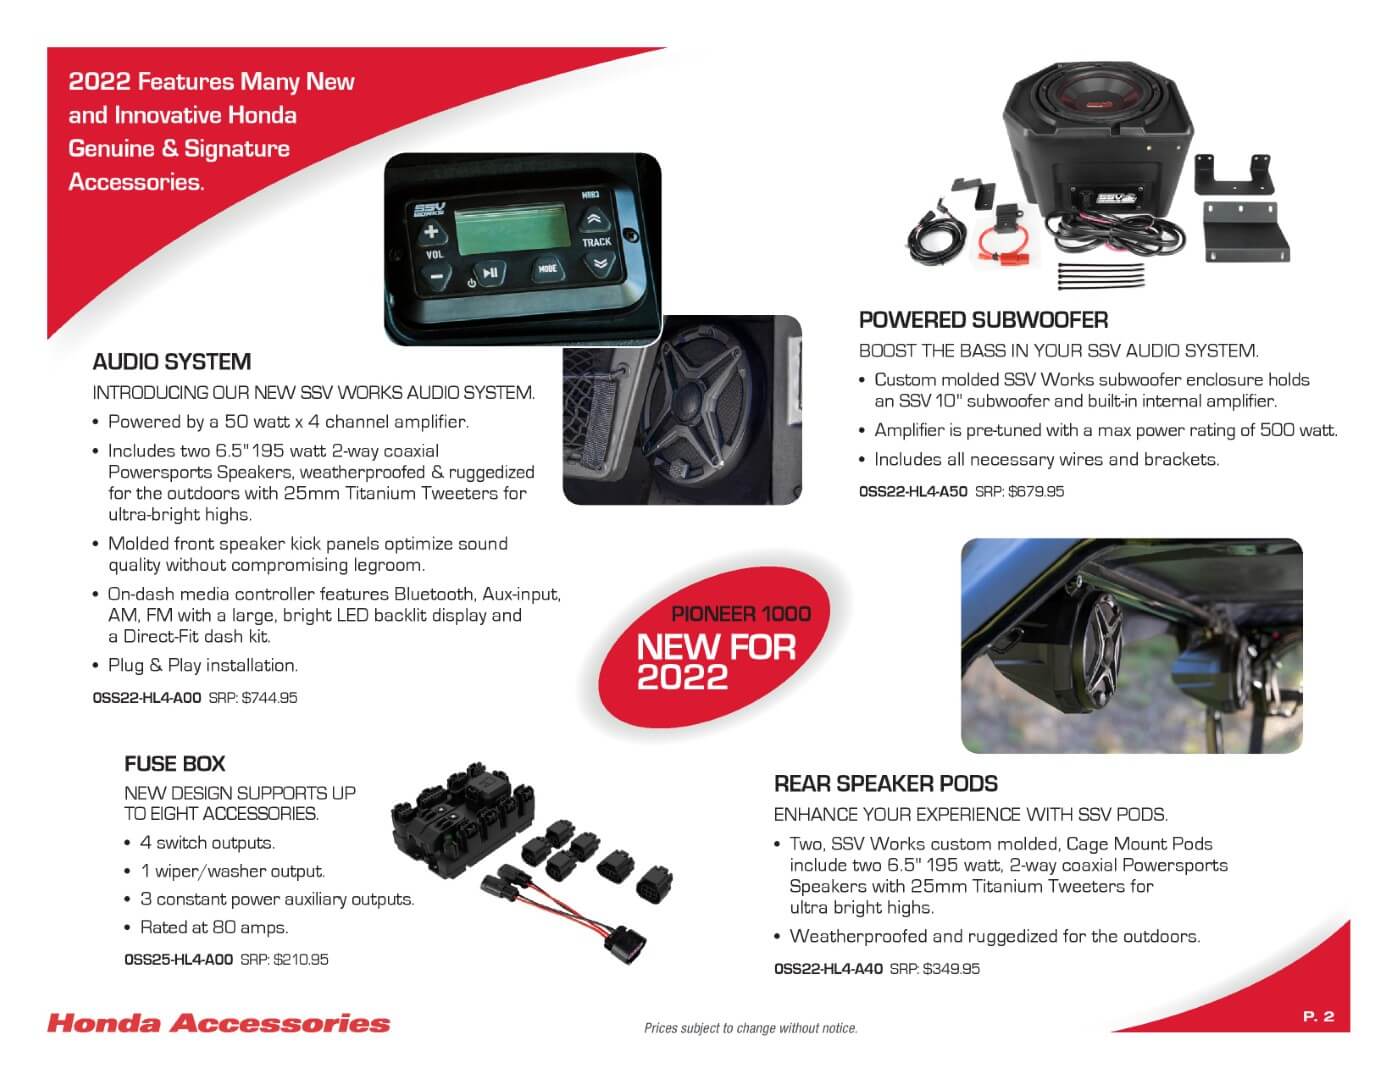 2022 Honda Pioneer 1000 Accessory Catalog / Accessories | Page 2 (including Pioneer 1000-5 Accessories)